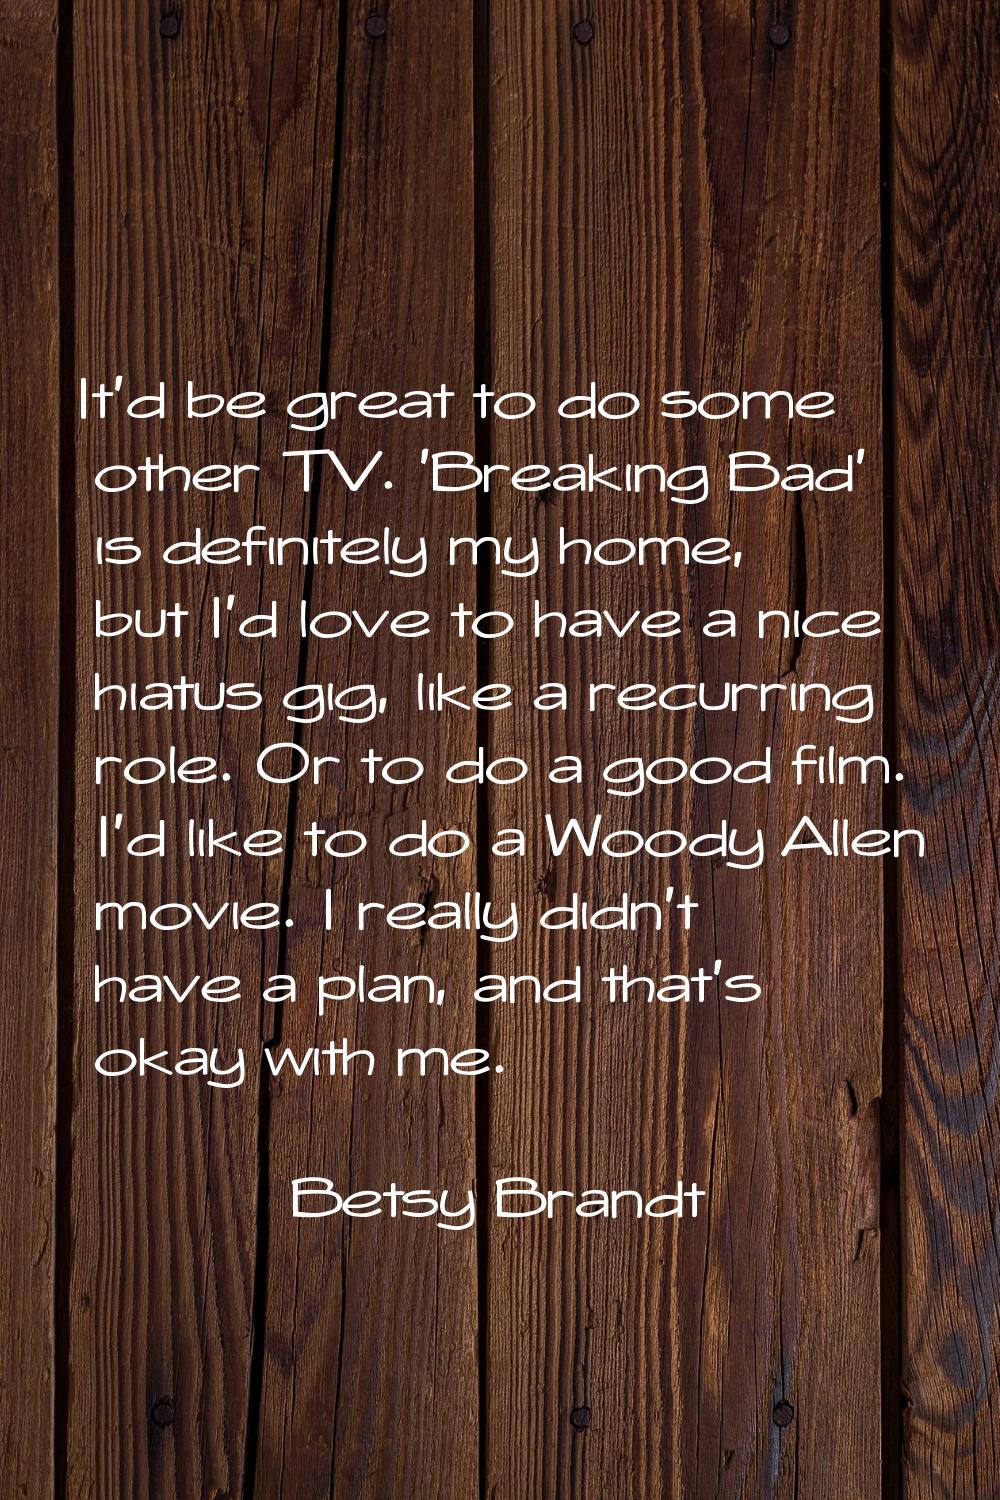 It'd be great to do some other TV. 'Breaking Bad' is definitely my home, but I'd love to have a nic